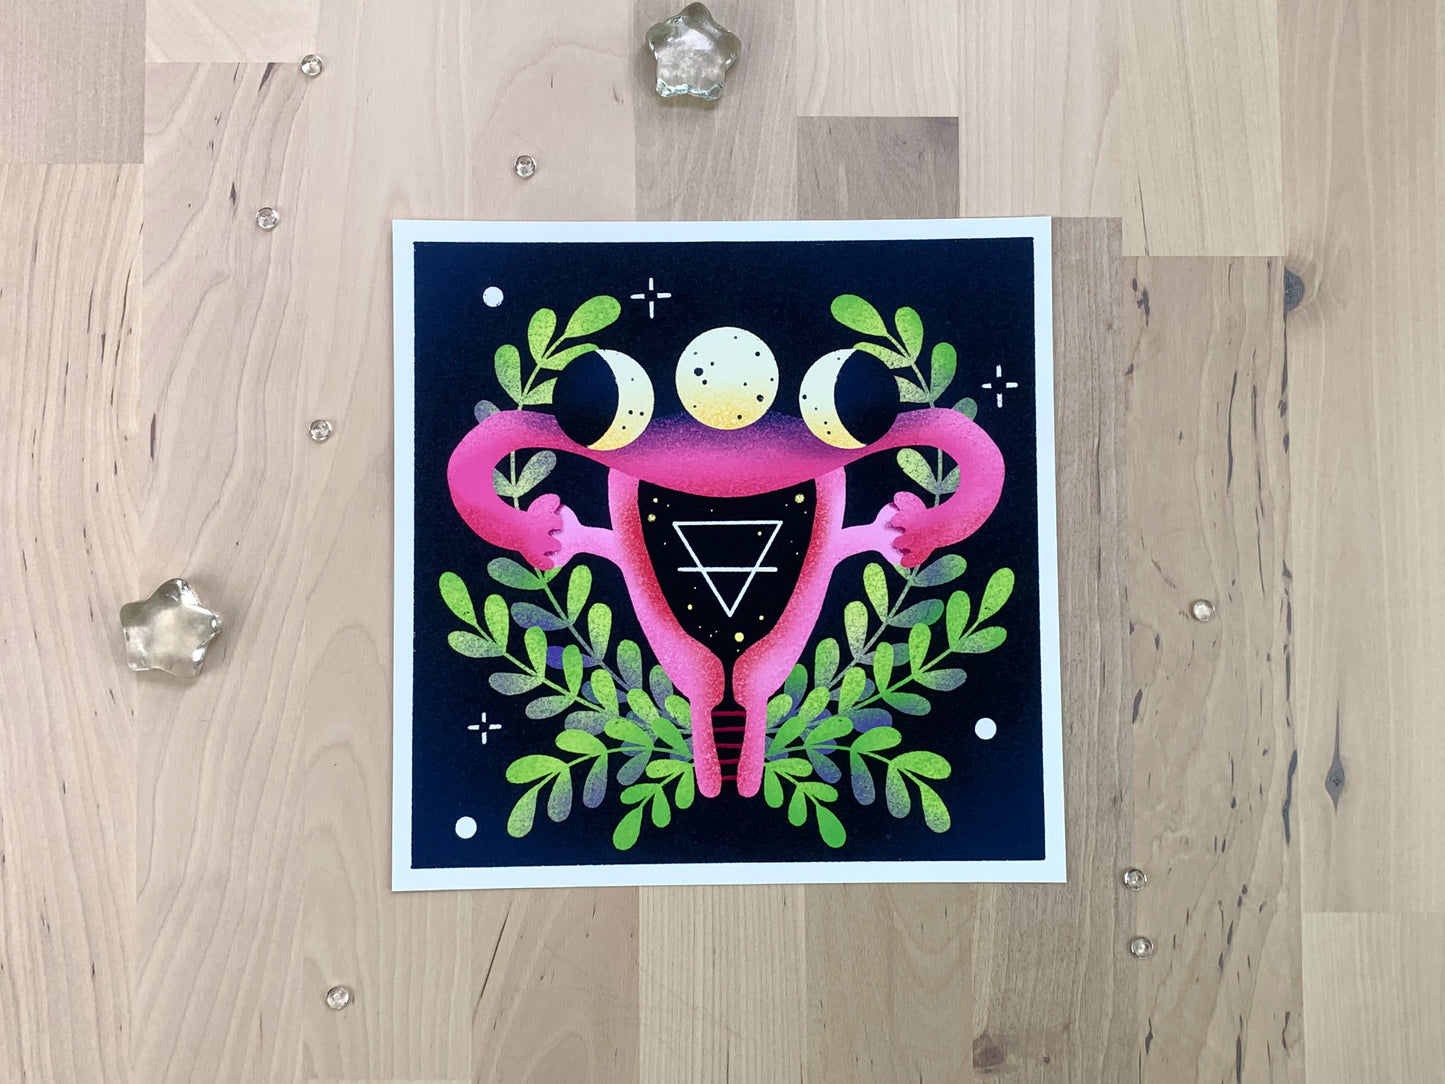 An illustration of a uterus with some witchy moon symbols in front of a wreath.